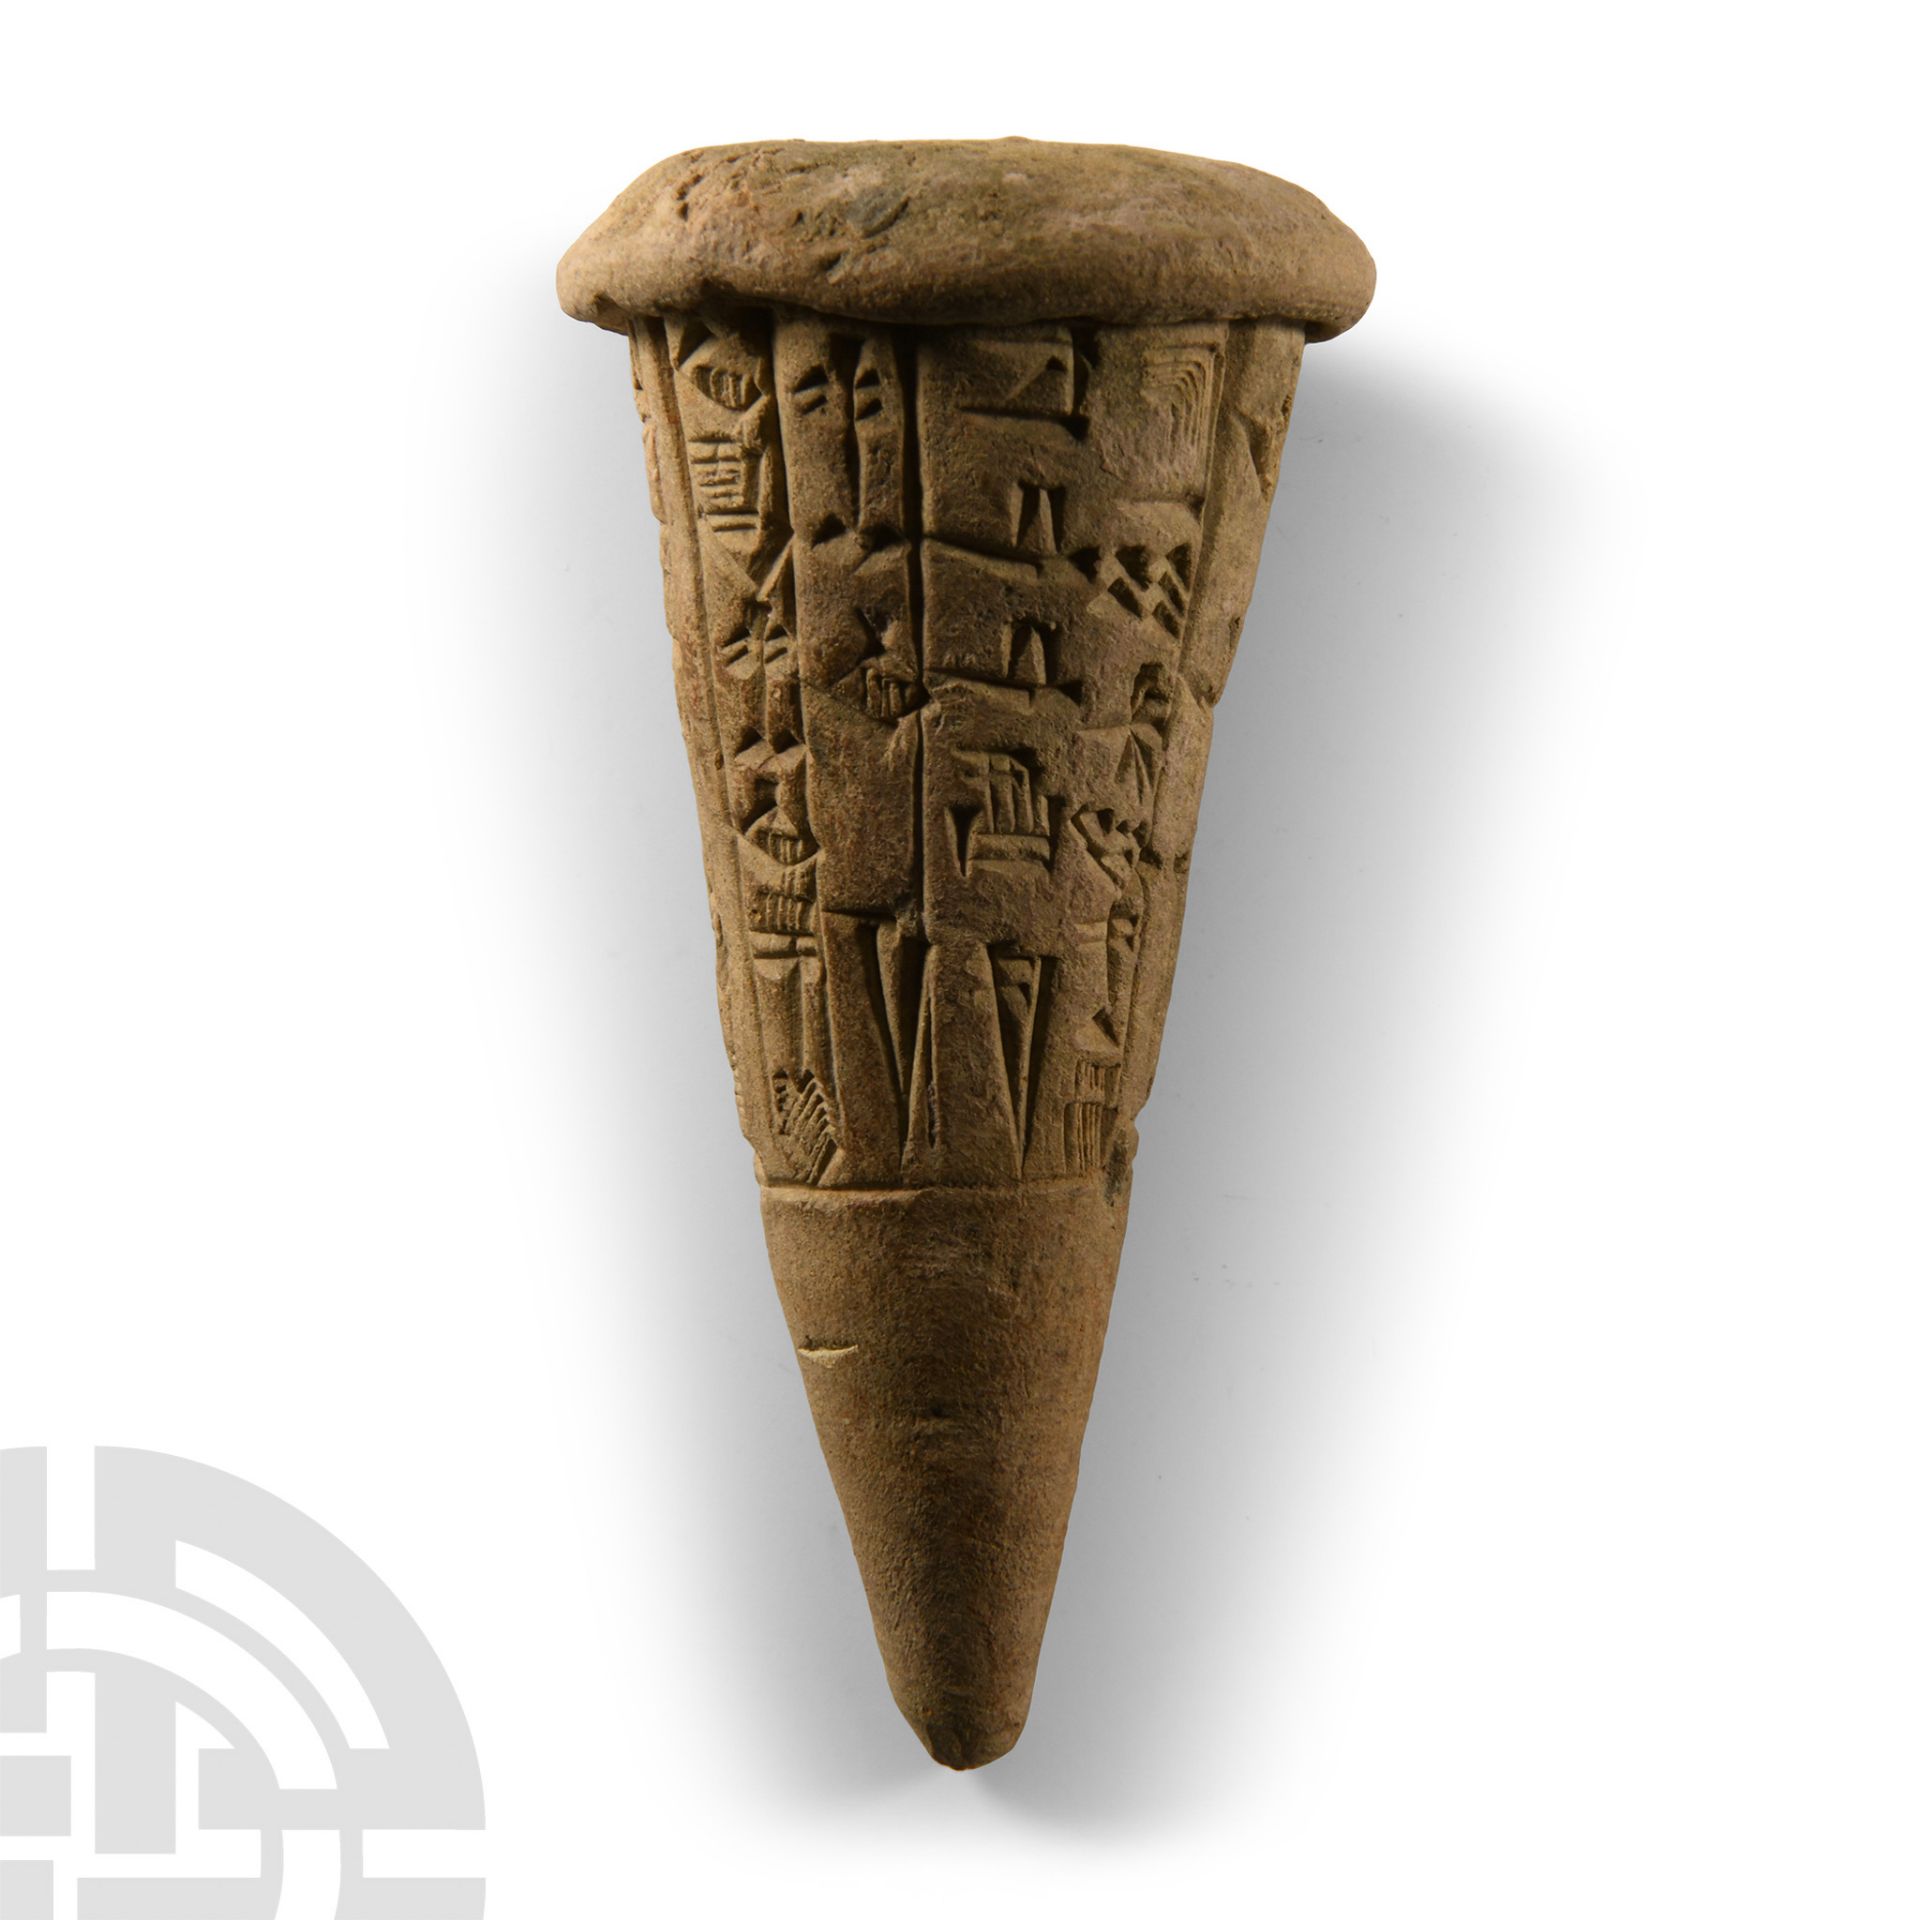 Sumerian Cuneiform Foundation Cone from Lagash During the Reign of Gudea - Image 4 of 4